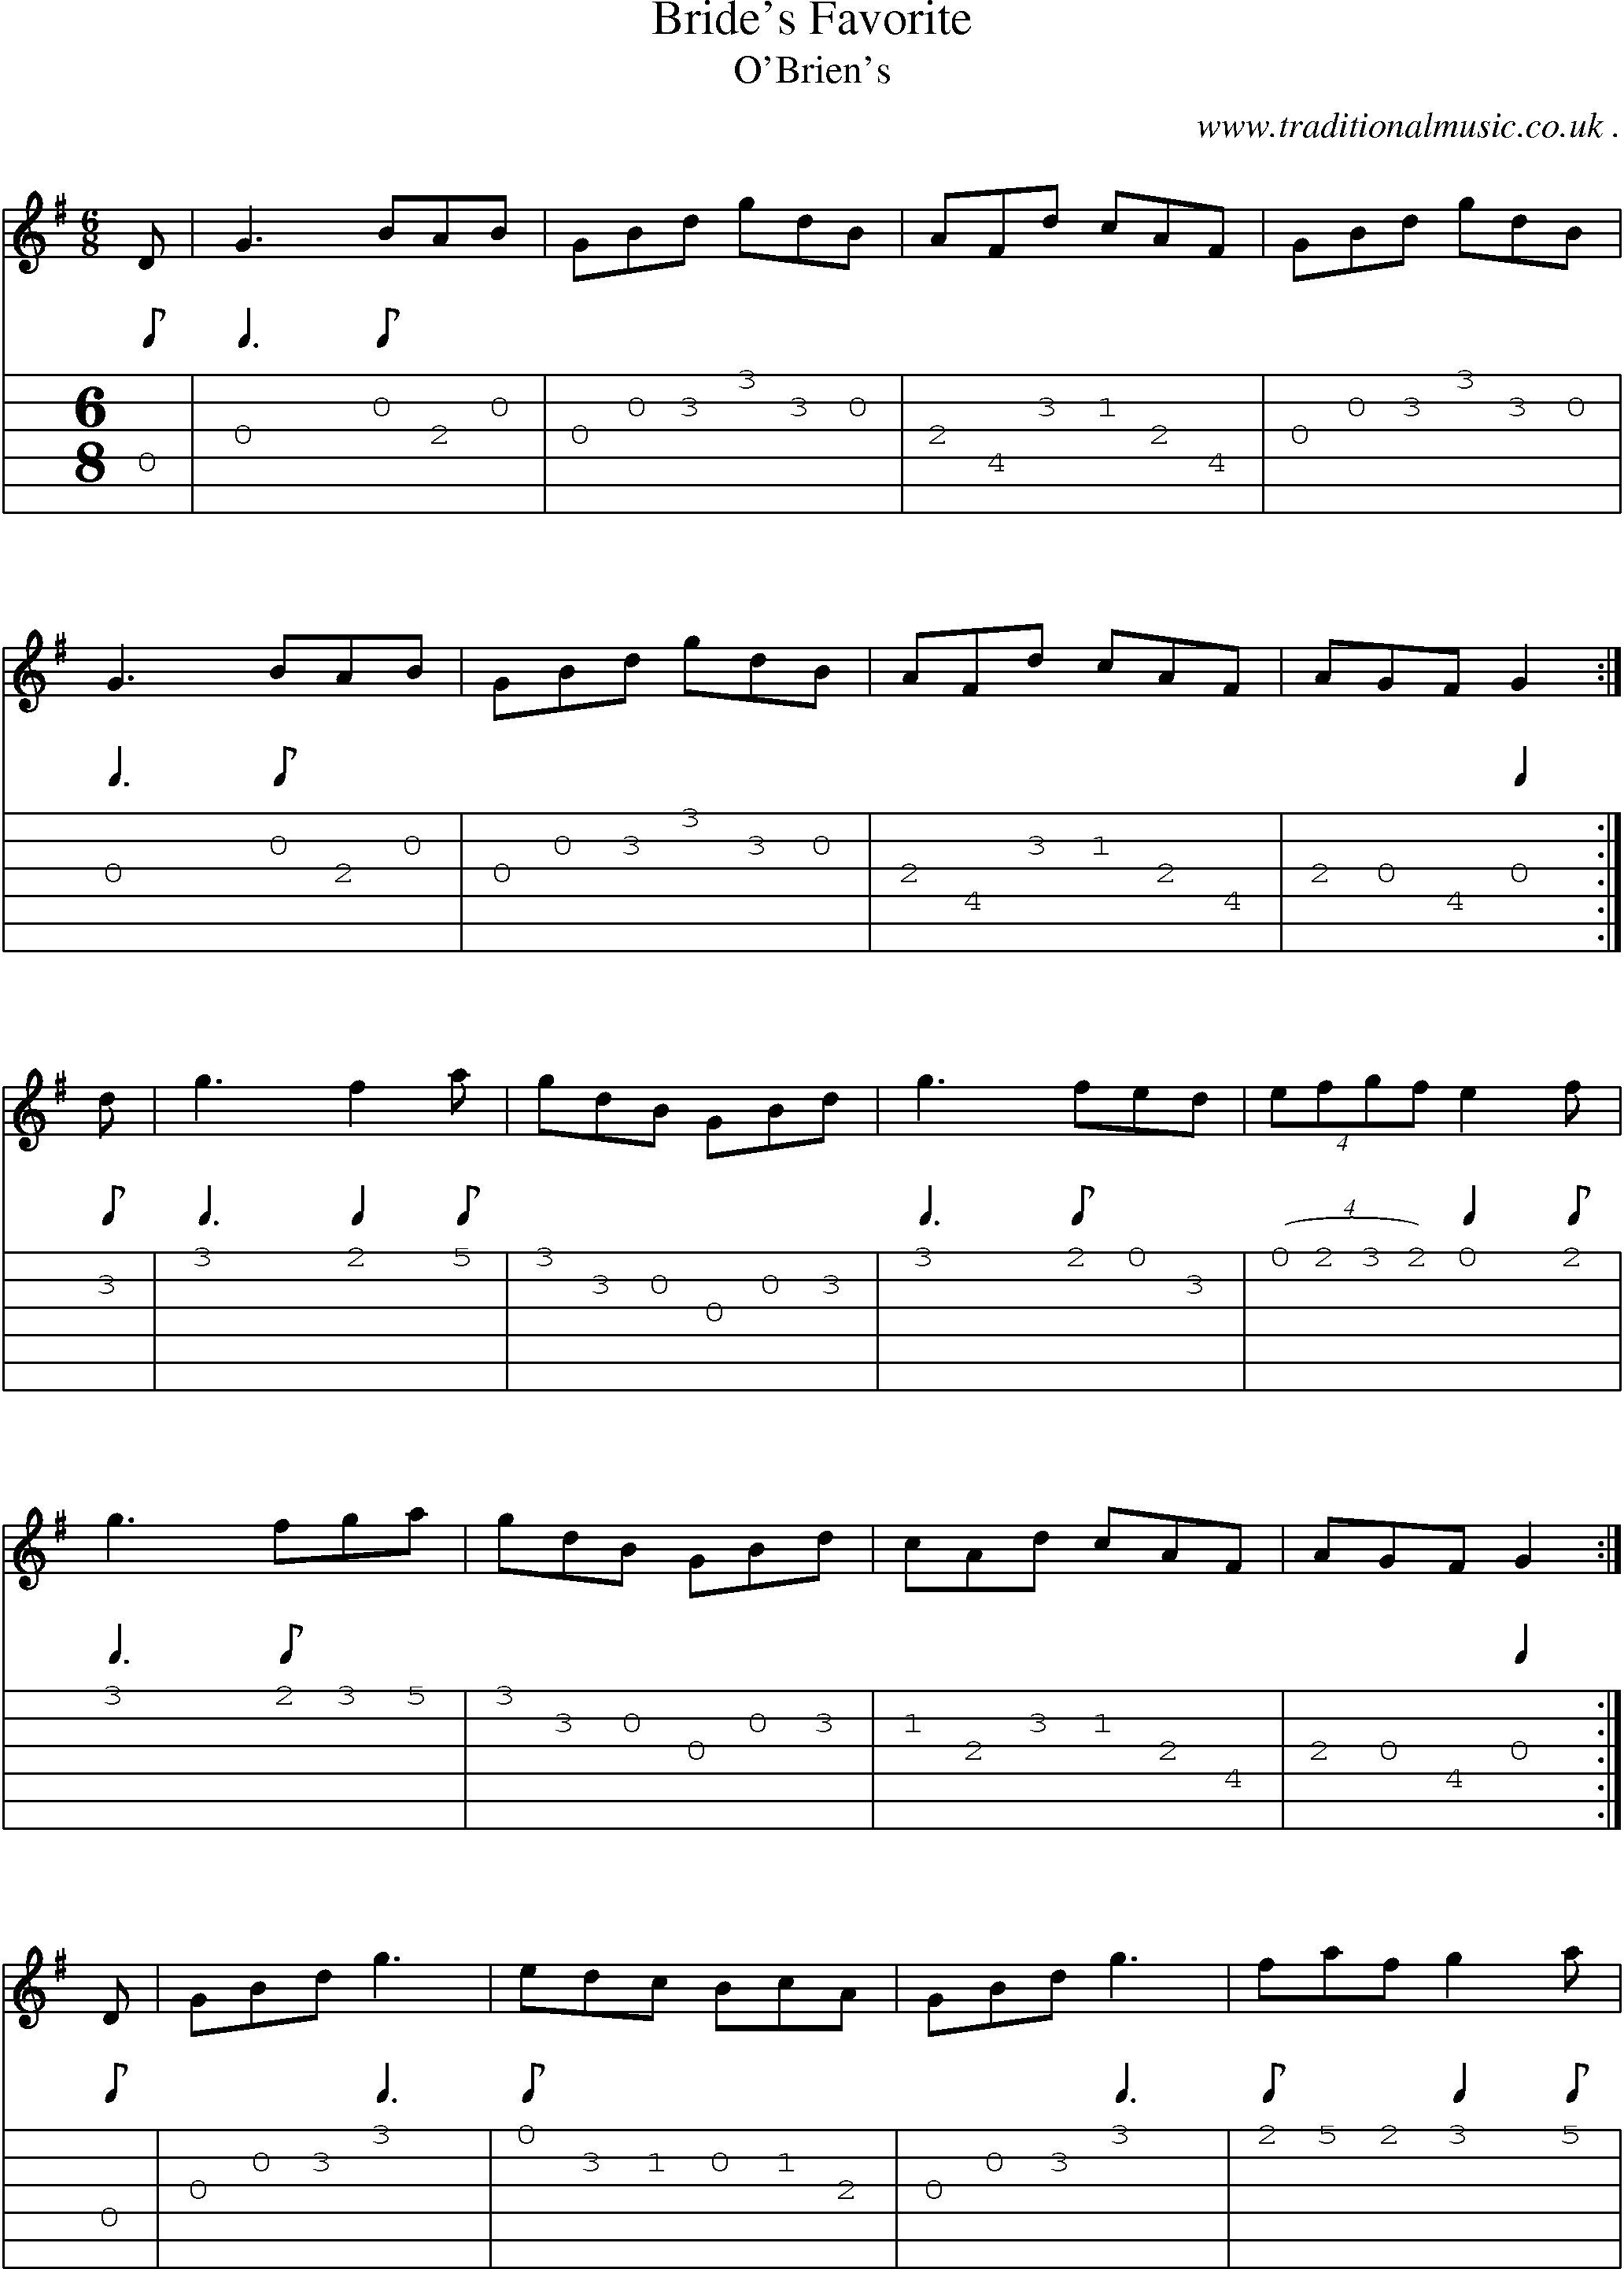 Sheet-Music and Guitar Tabs for Brides Favorite